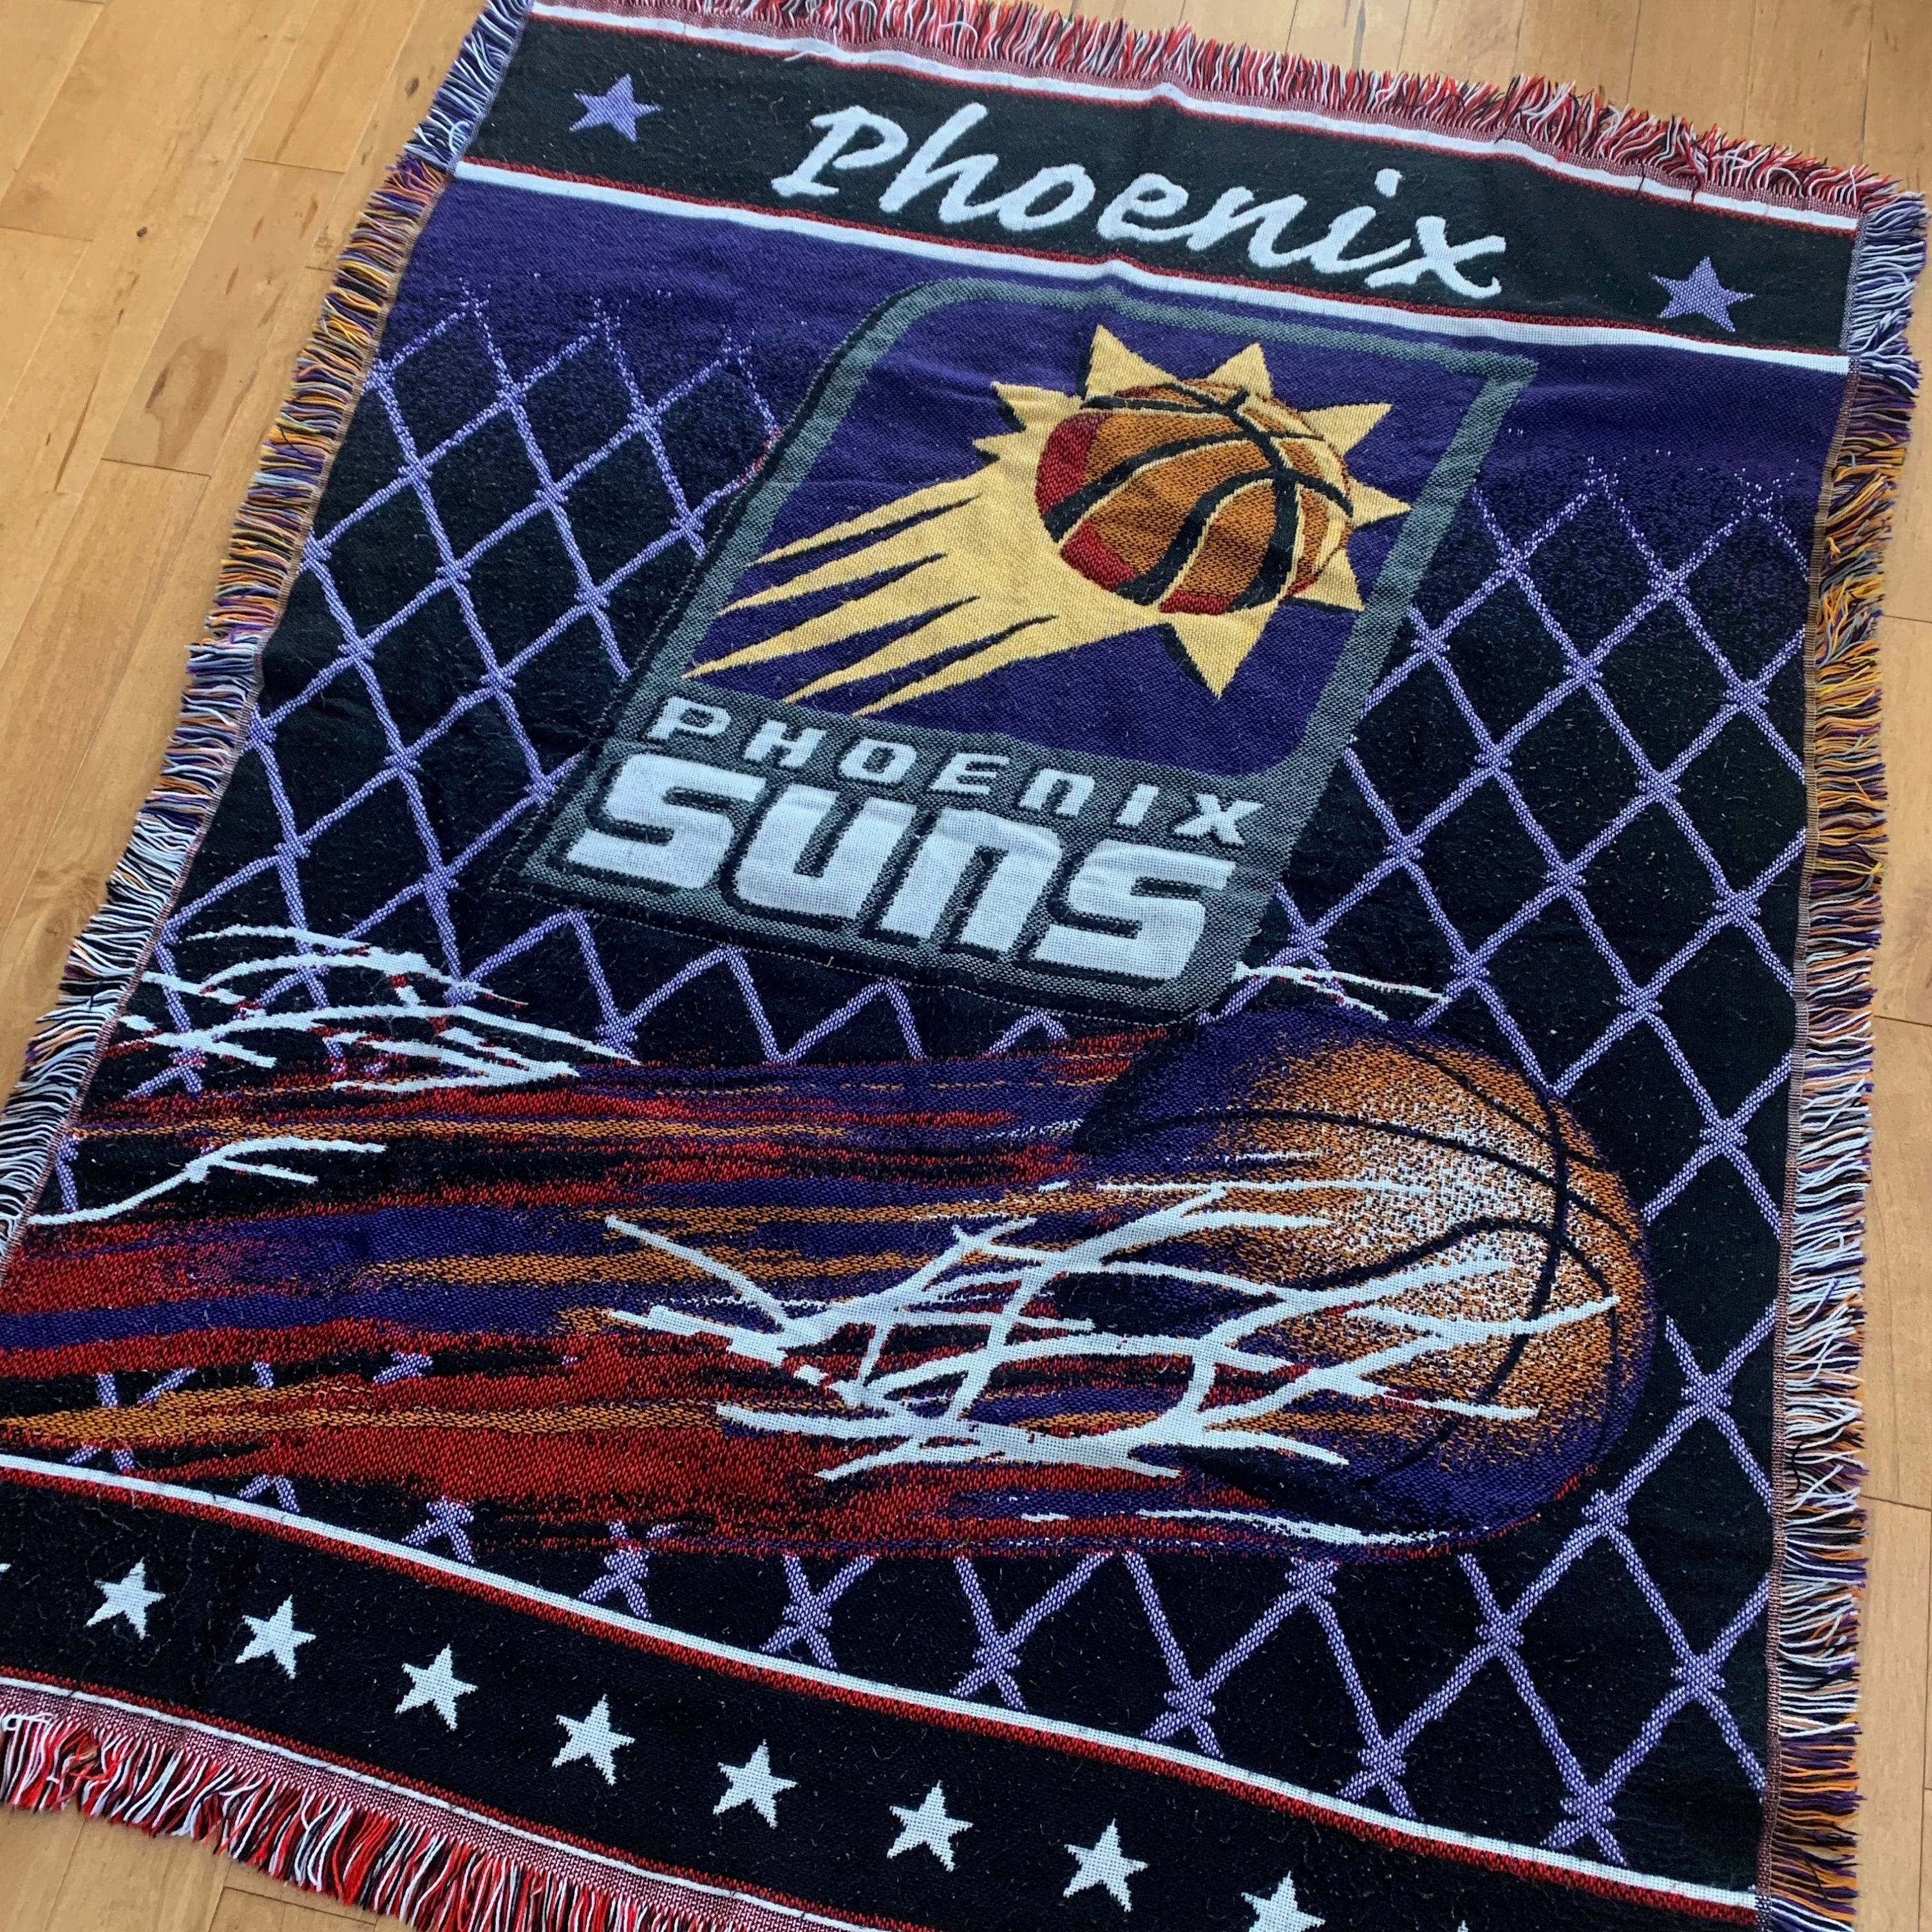  Northwest NBA Phoenix Suns Personalized Silk Touch Sherpa Throw  Blanket, 50 x 60, Jersey (351) : Sports & Outdoors